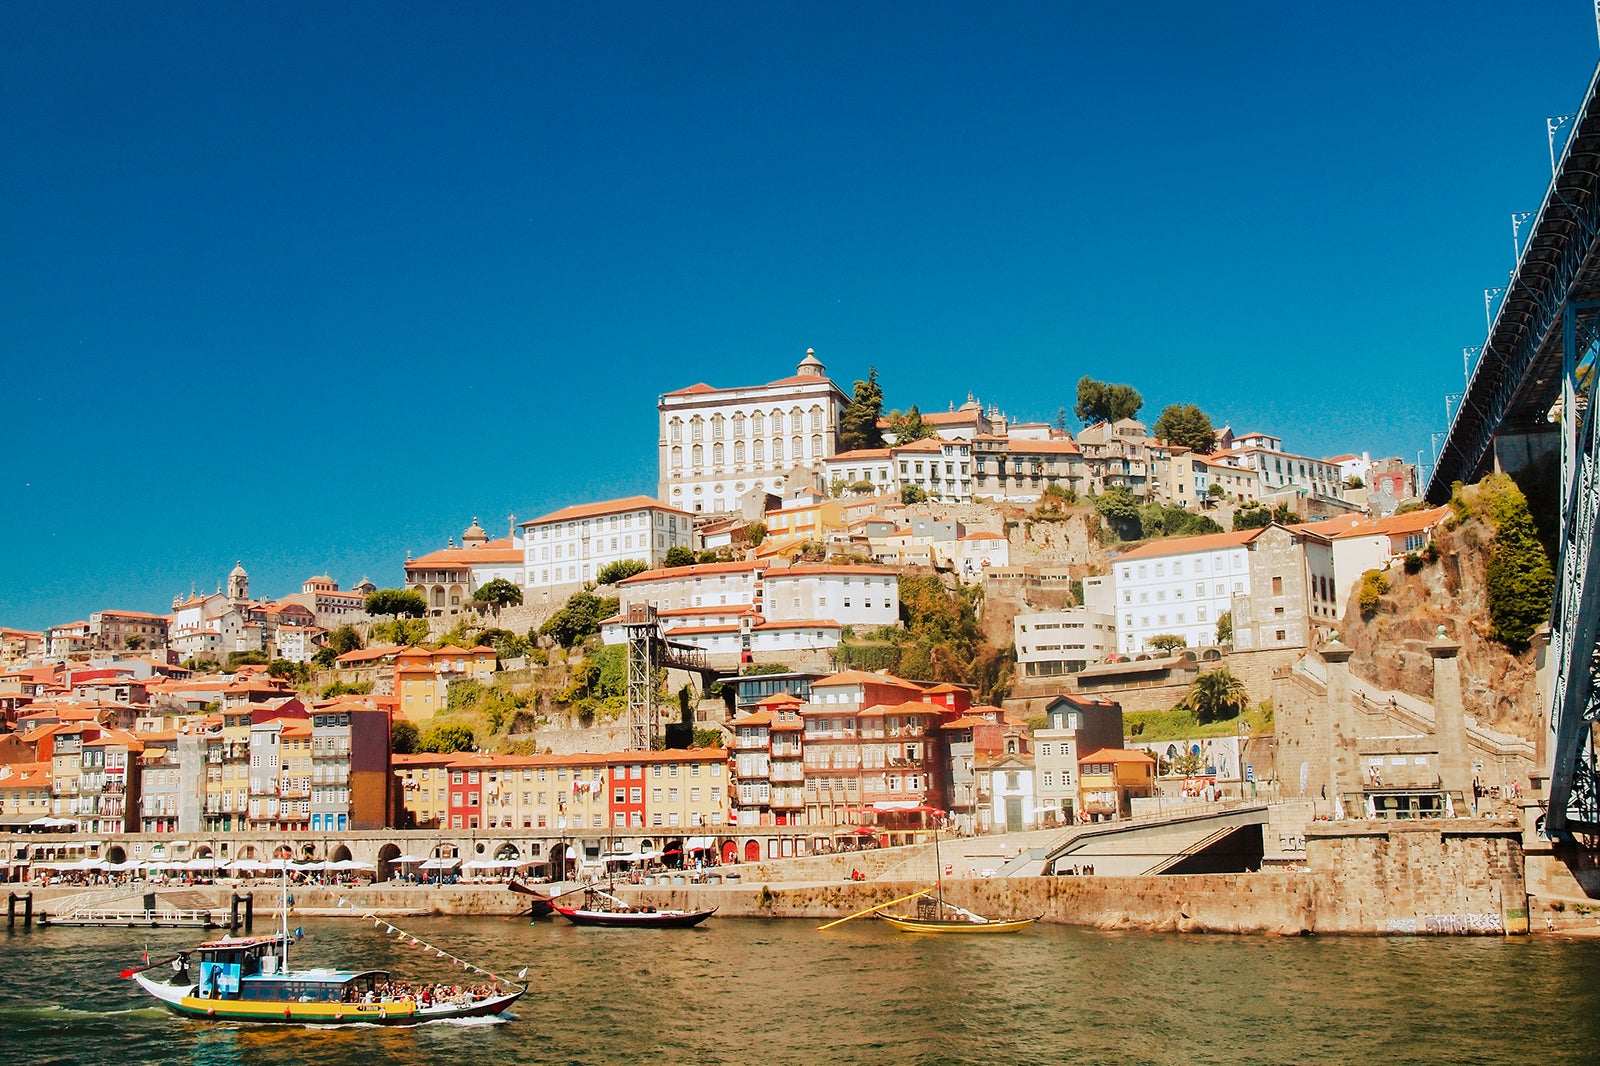 A portion of Porto, Portugal, as it rises up over the Douro River with blue sky behind it